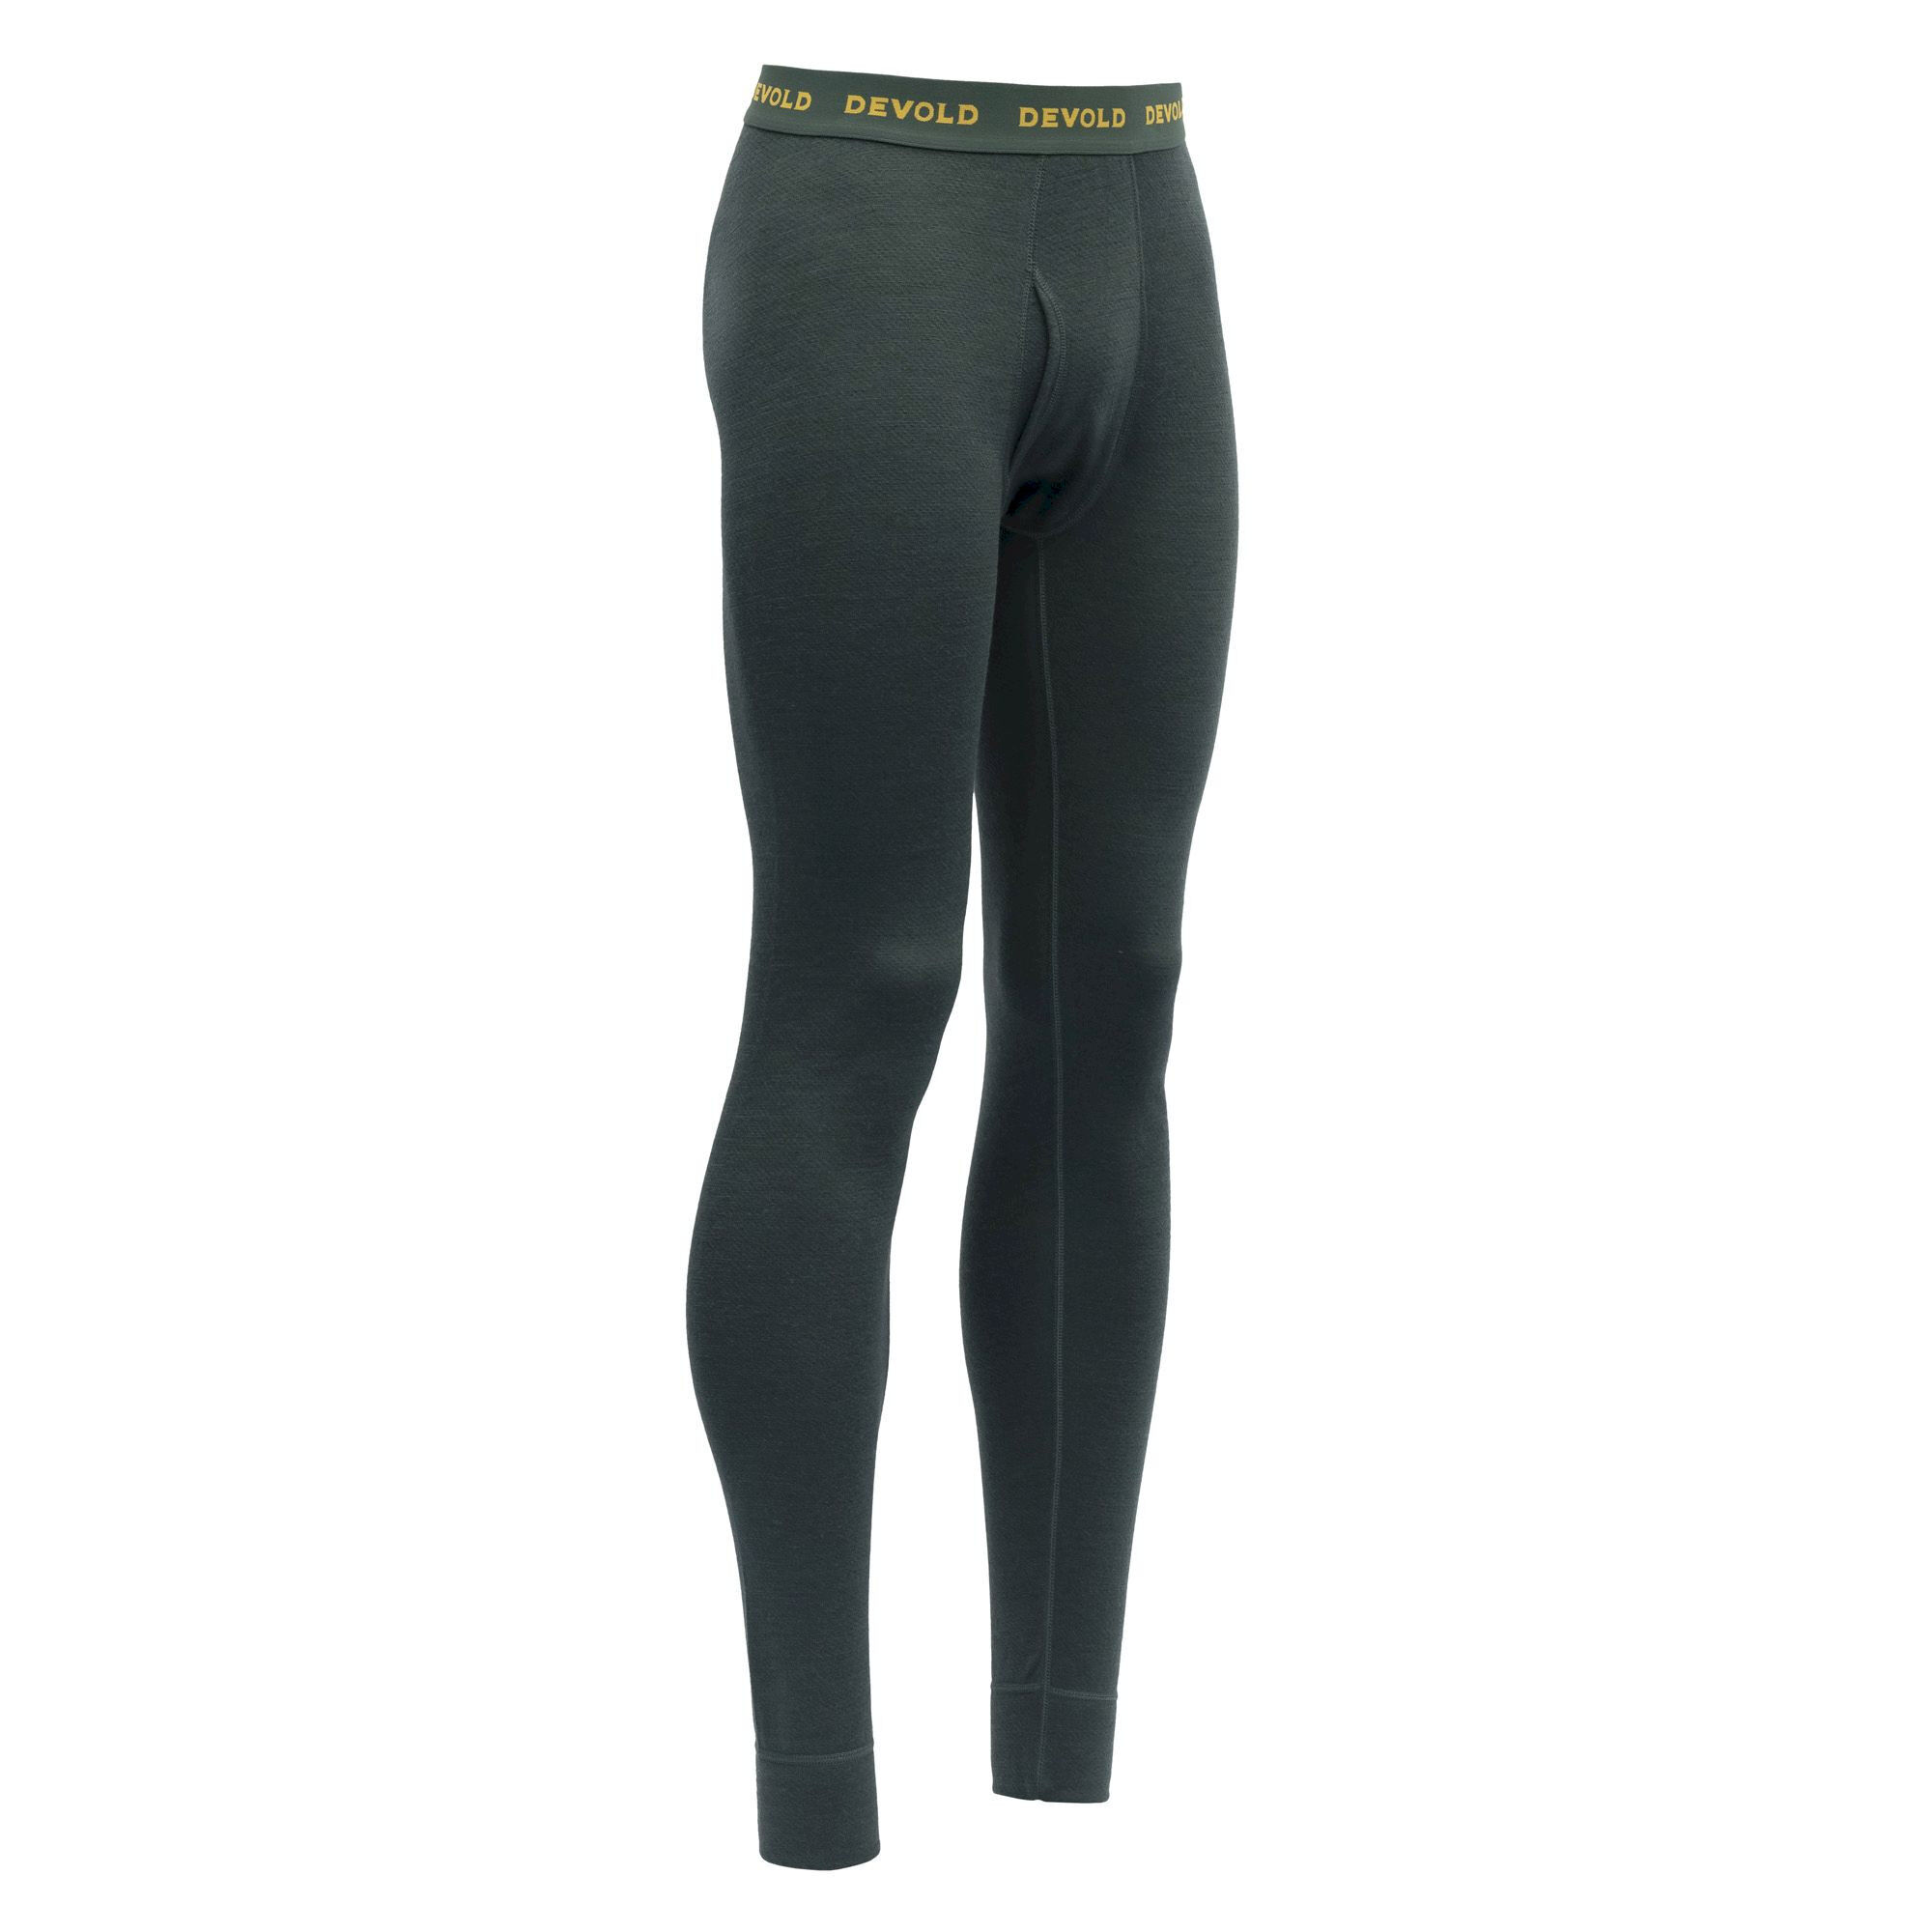 Devold Expedition Long Johns - Base layer - Men's